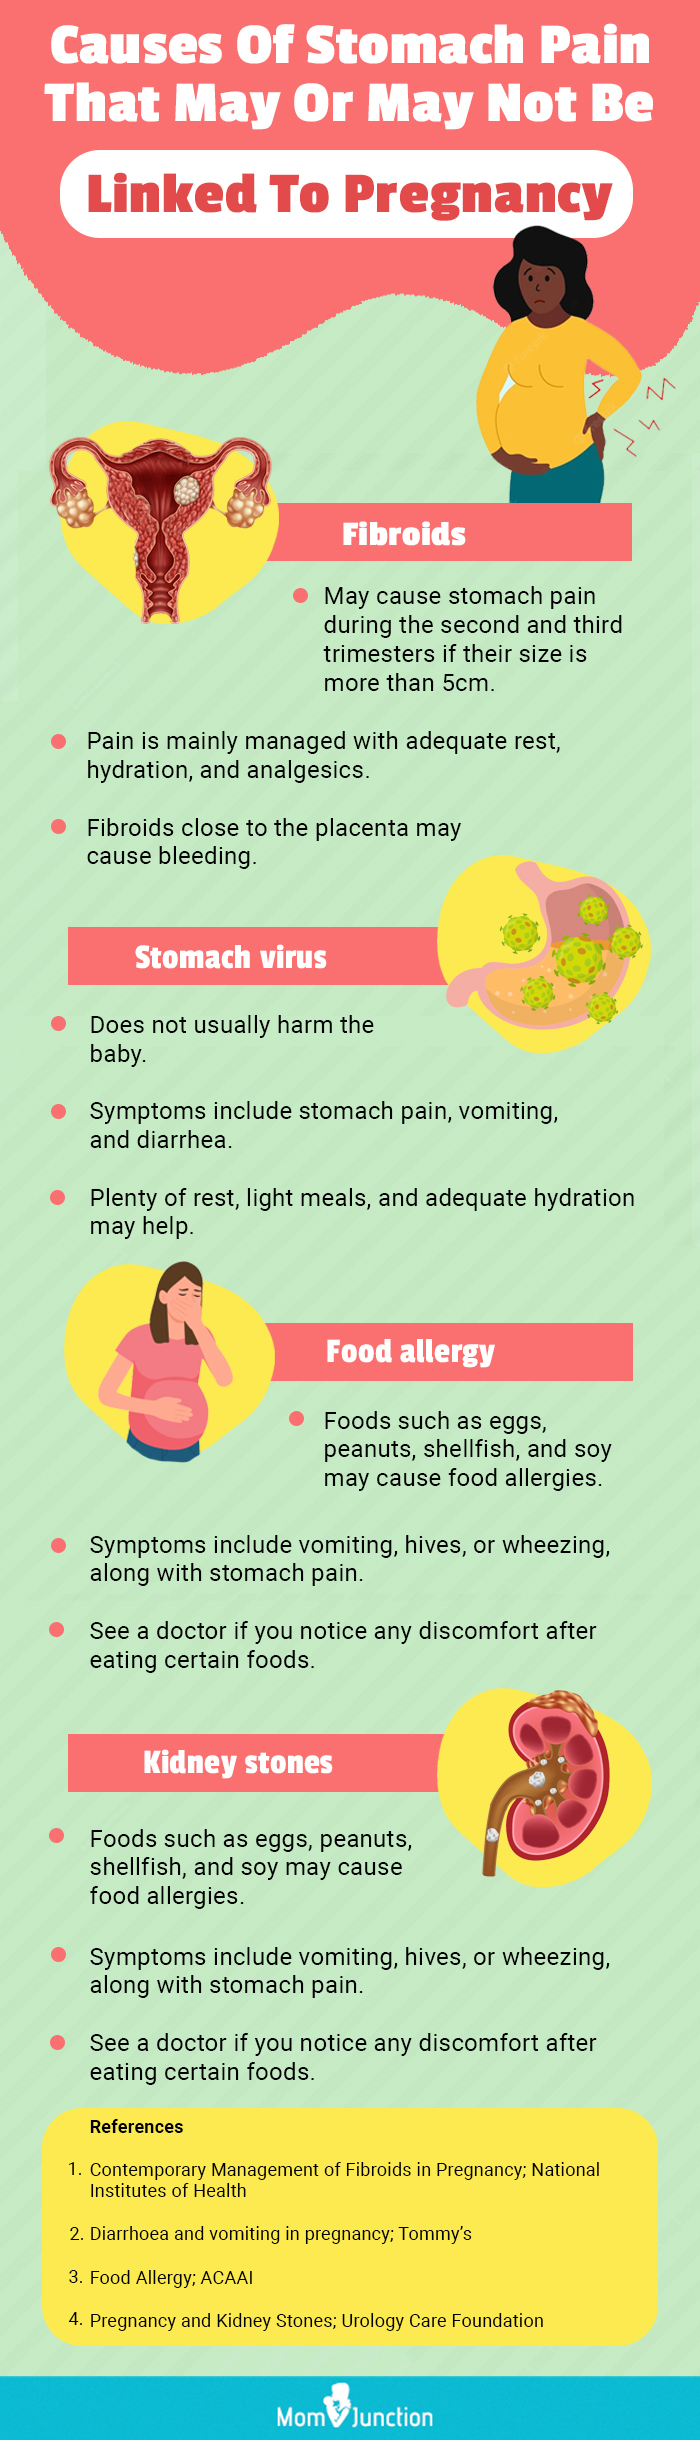 causes of stomach pain that may or may not be linked to pregnancy (infographic)